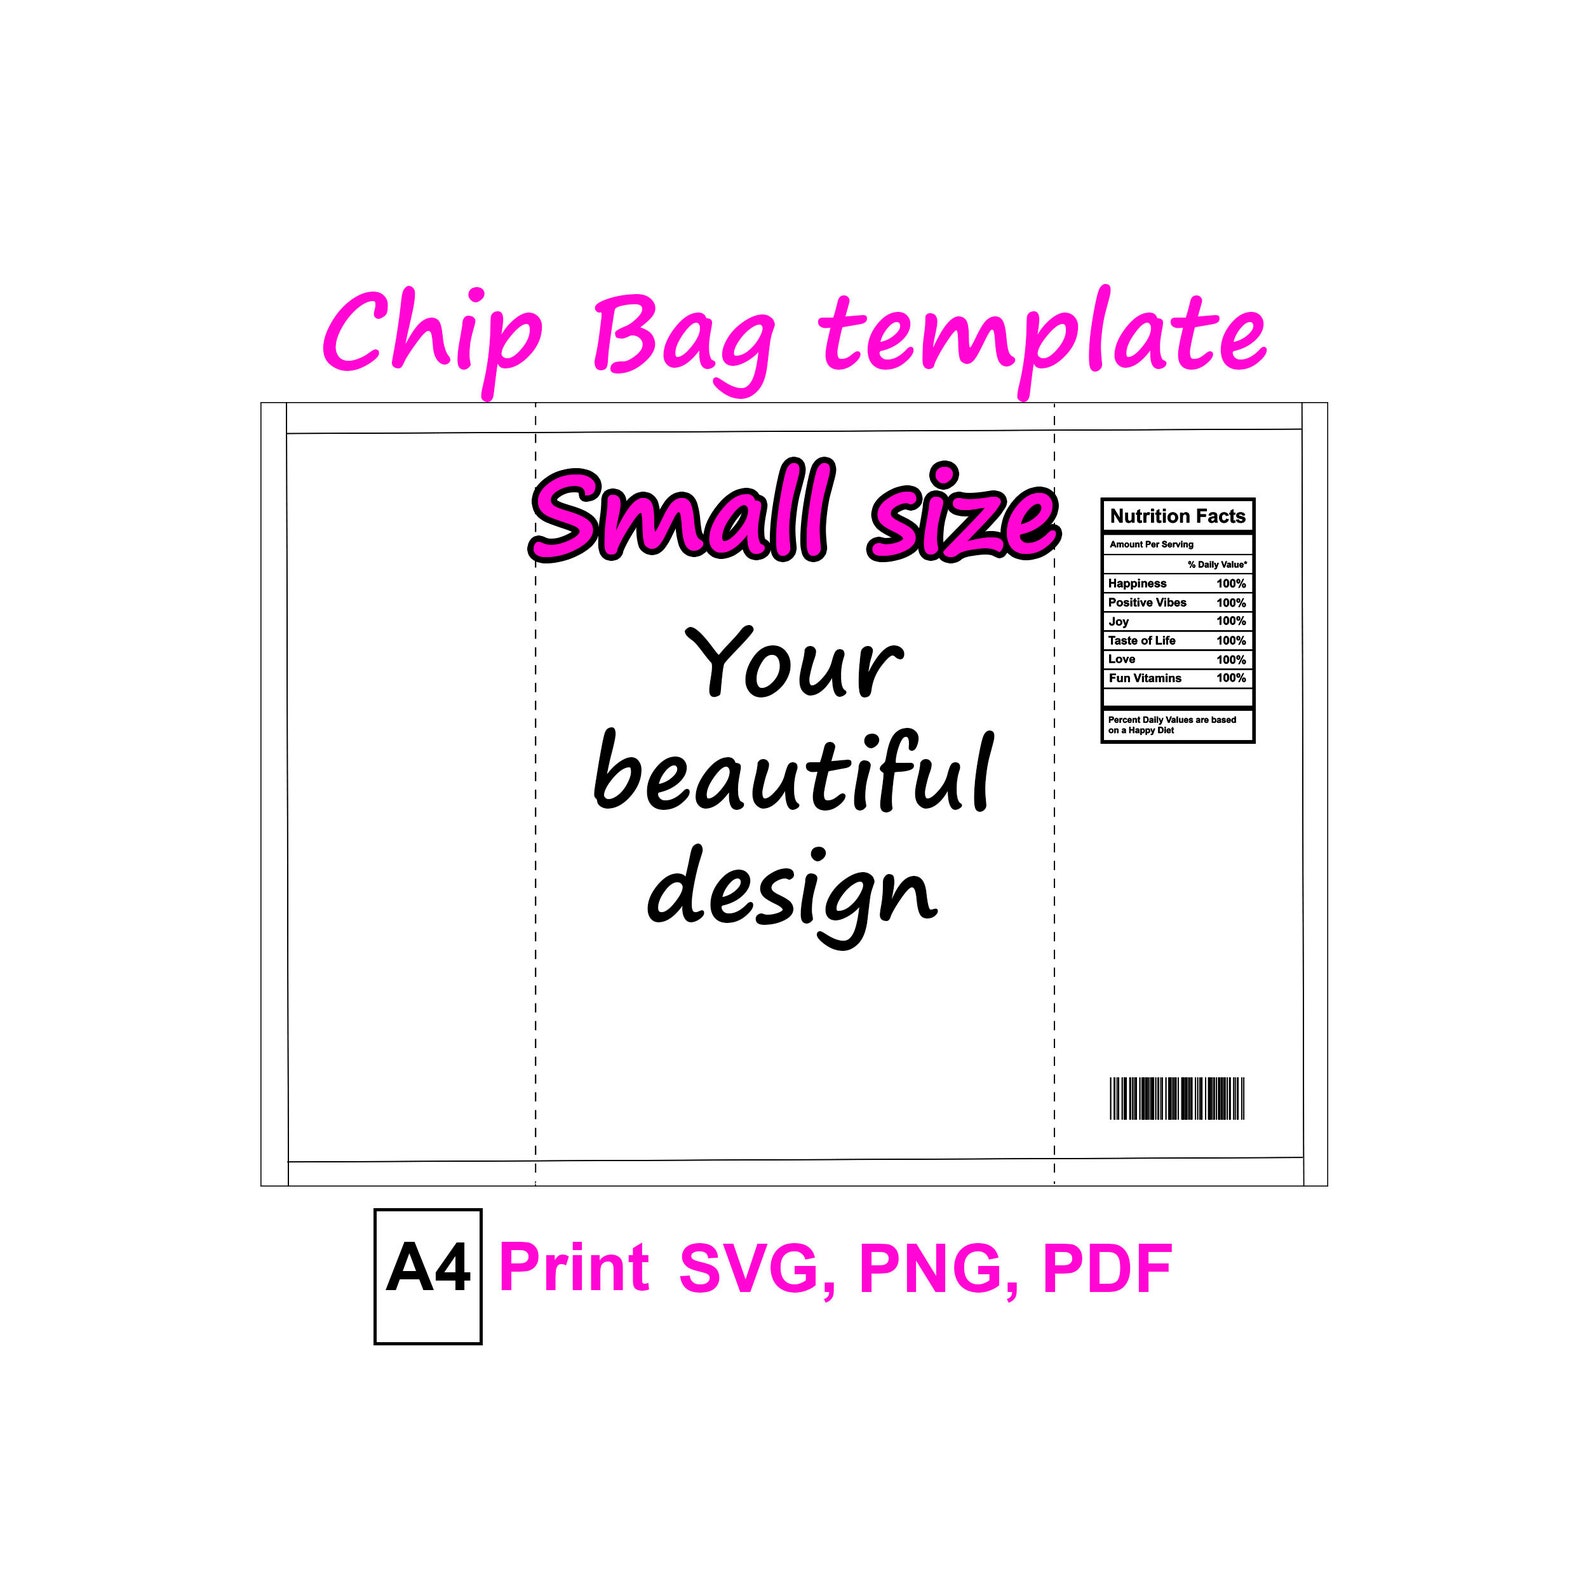 Chips Bag Template. Small Size. A4 Blank Digital Template for | Etsy